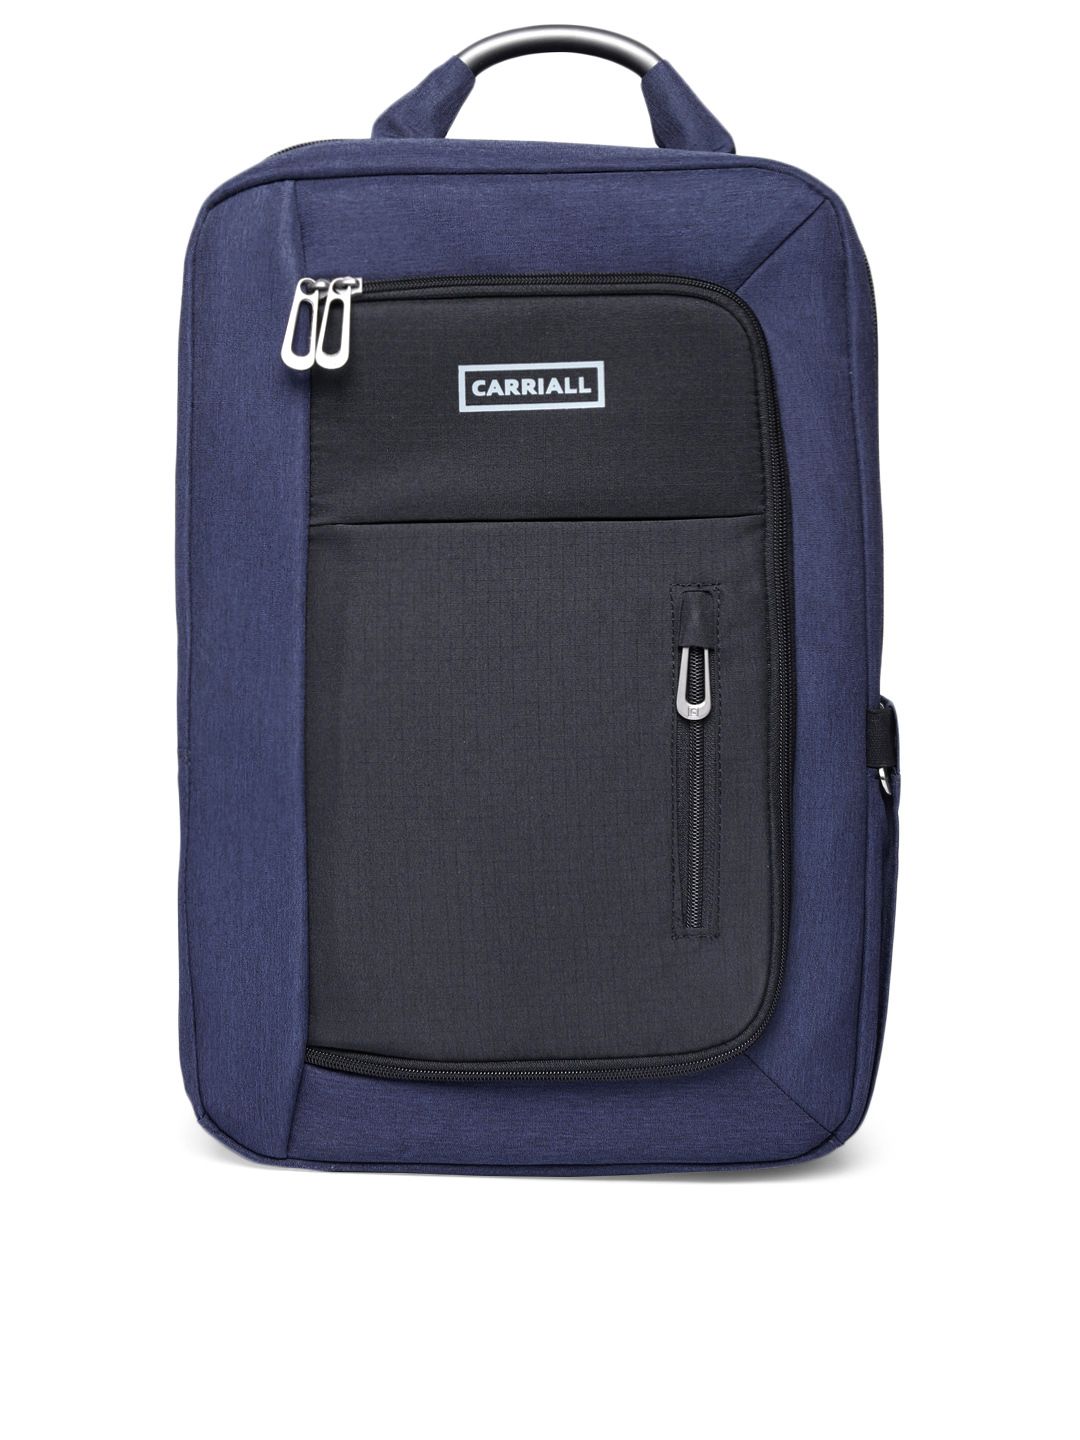 CARRIALL Unisex Blue & Black Colourblocked Minch Laptop Backpack Price in India